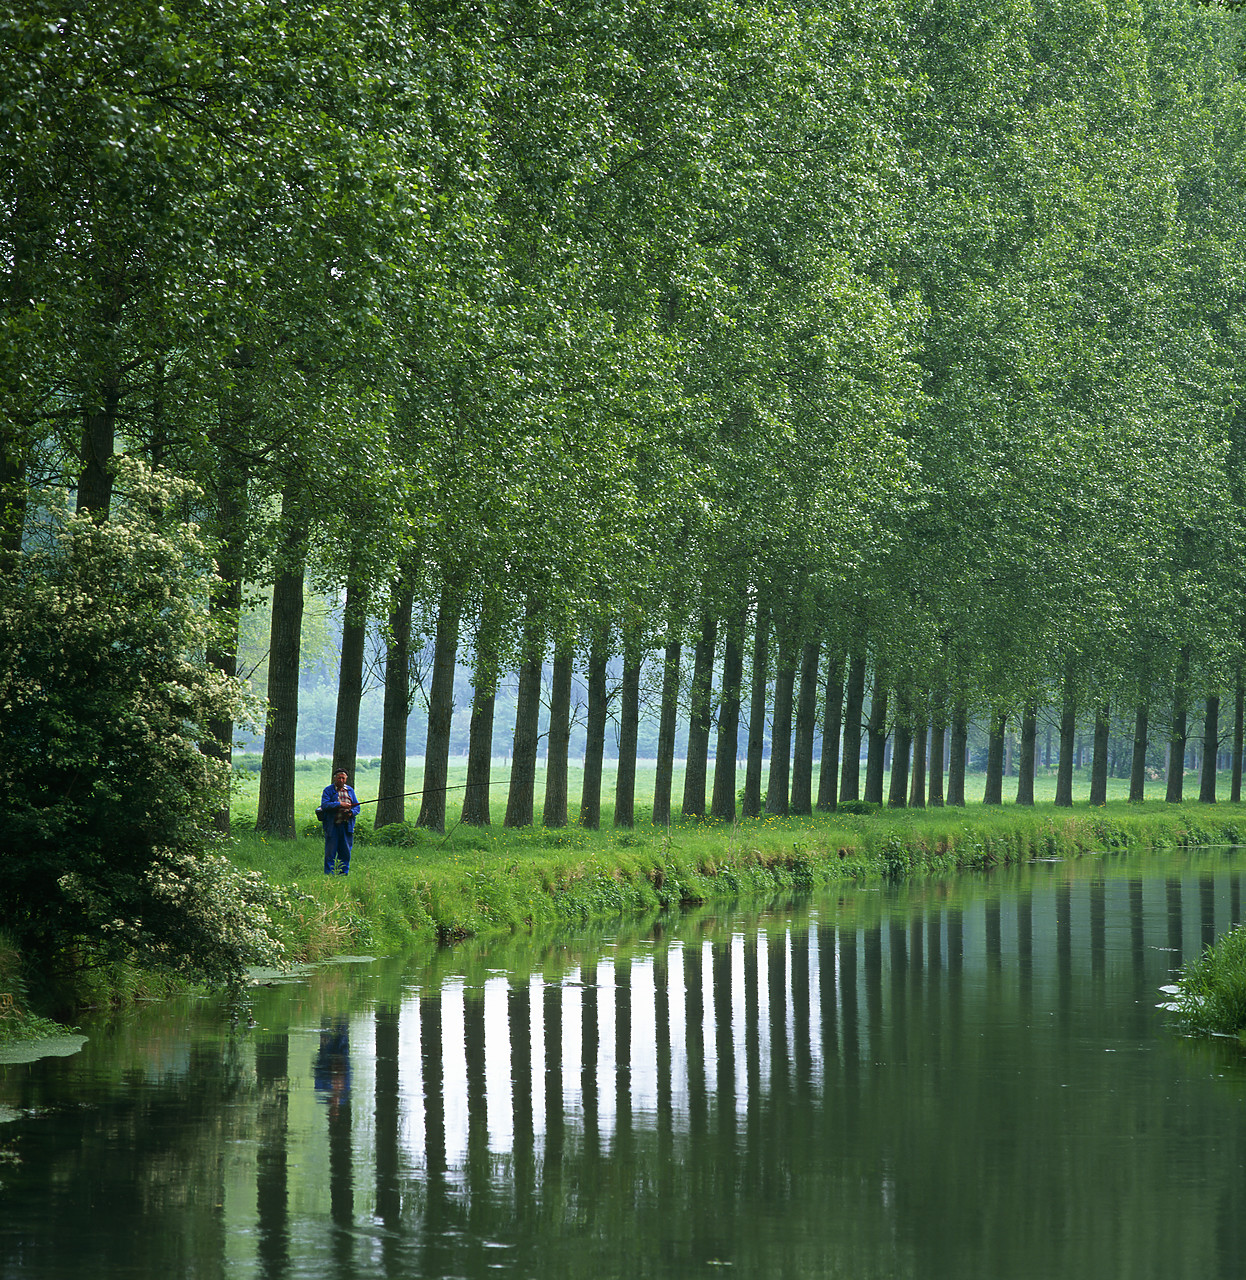 #970339-2 - Fisherman & Poplar Trees Reflecting in River Authie, Vron, France